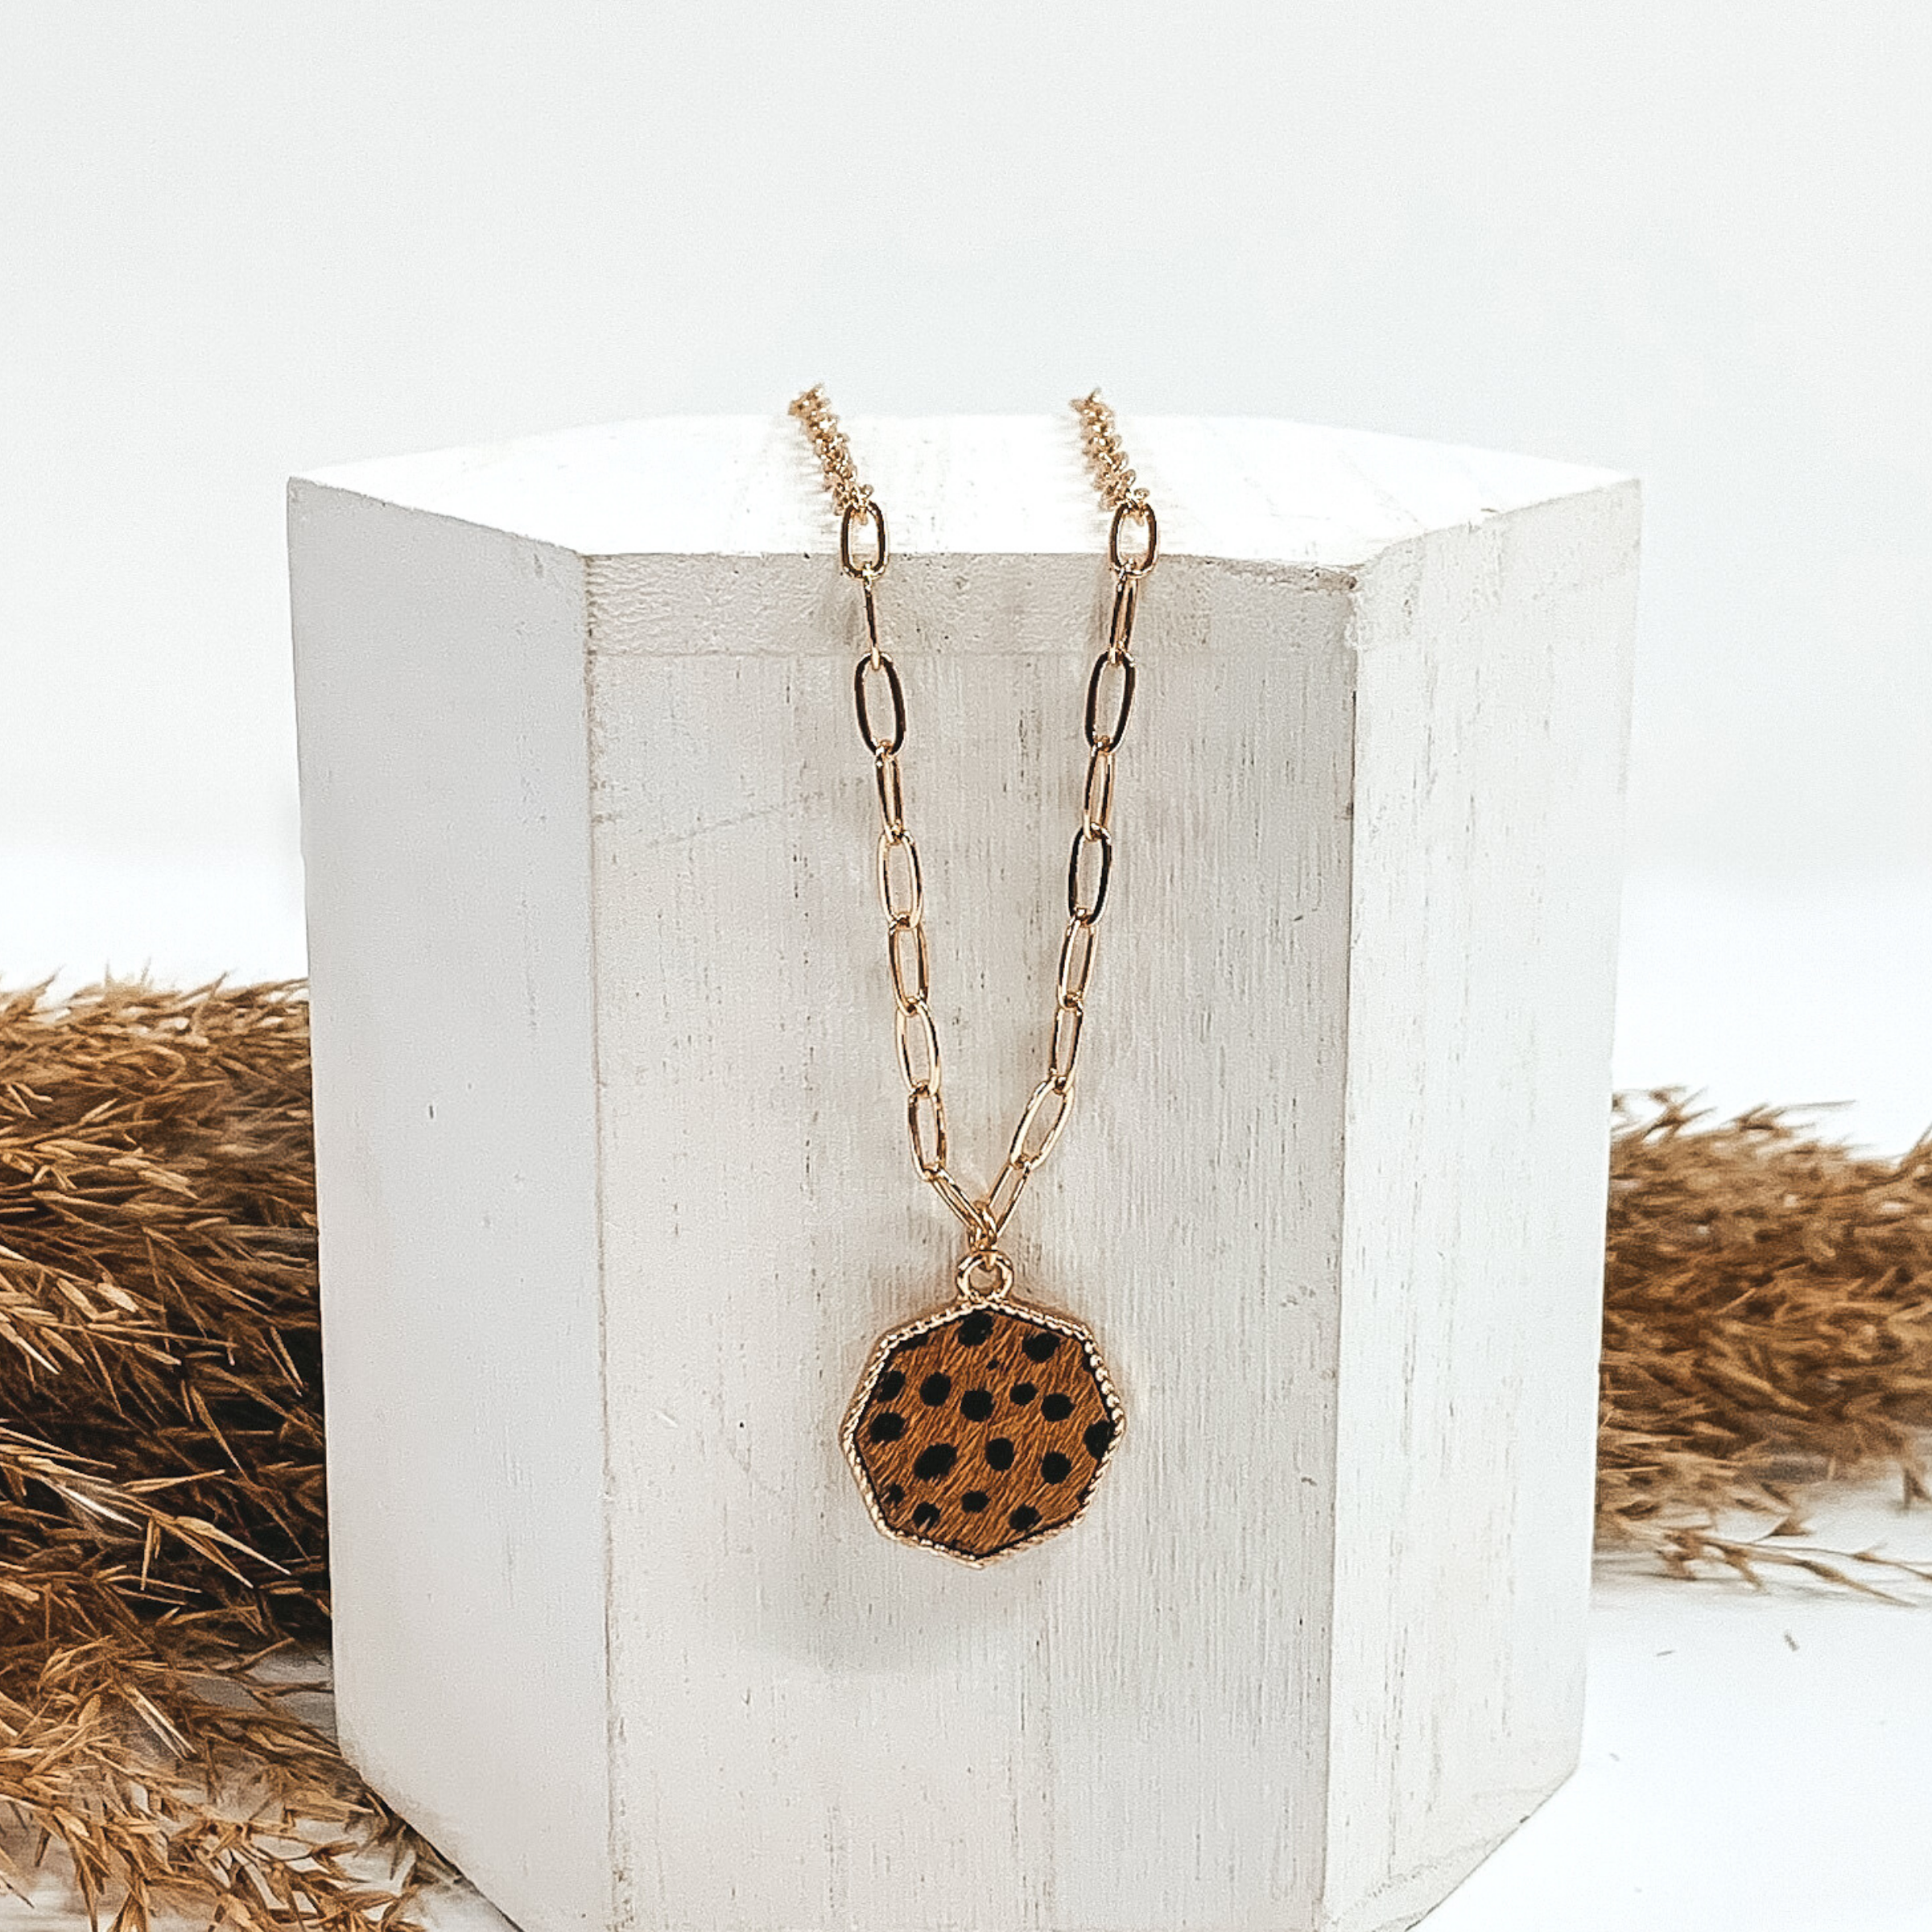 Gold paperclip chain with octagon pendant. The pendant has a brown hide inlay with black dots. This necklace is pictured laying on a white block with tan floral behind it. This is all pictured on a white background.